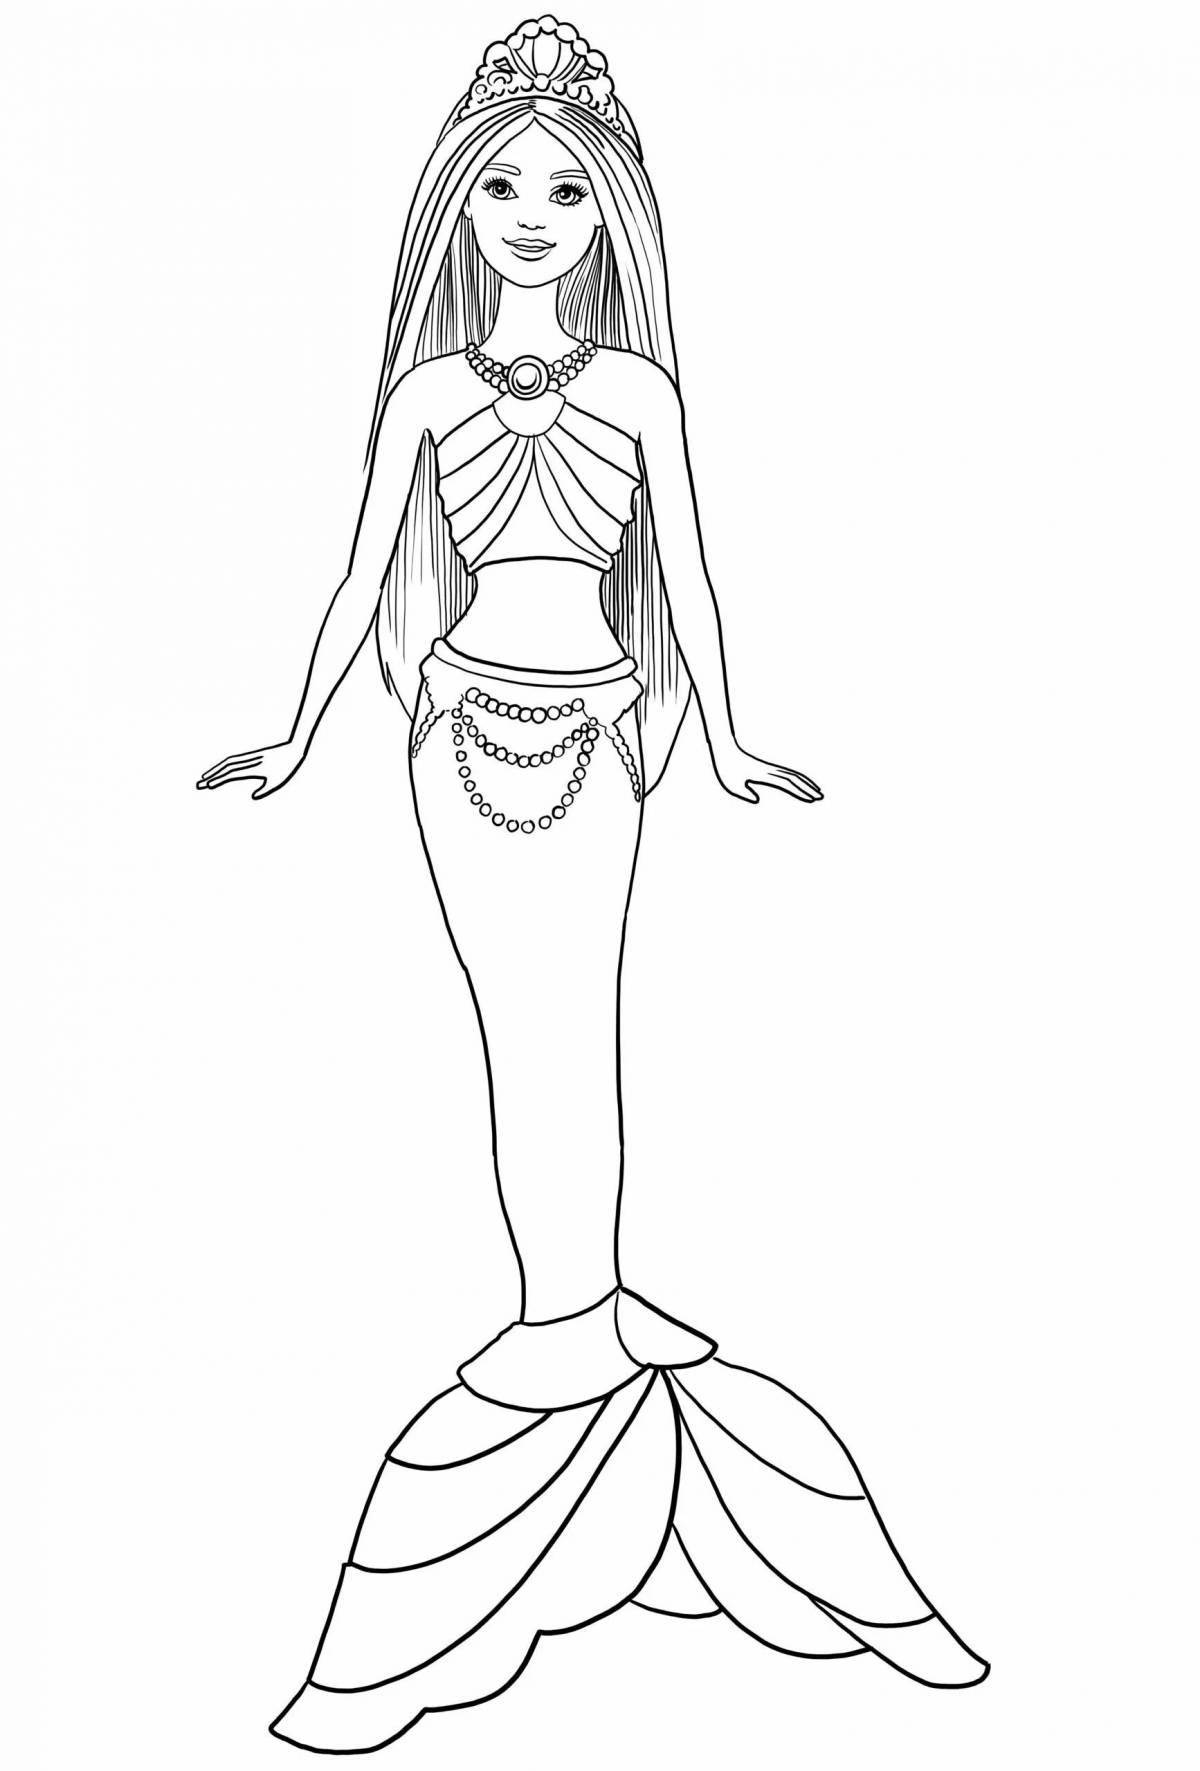 Radiant coloring page princess doll